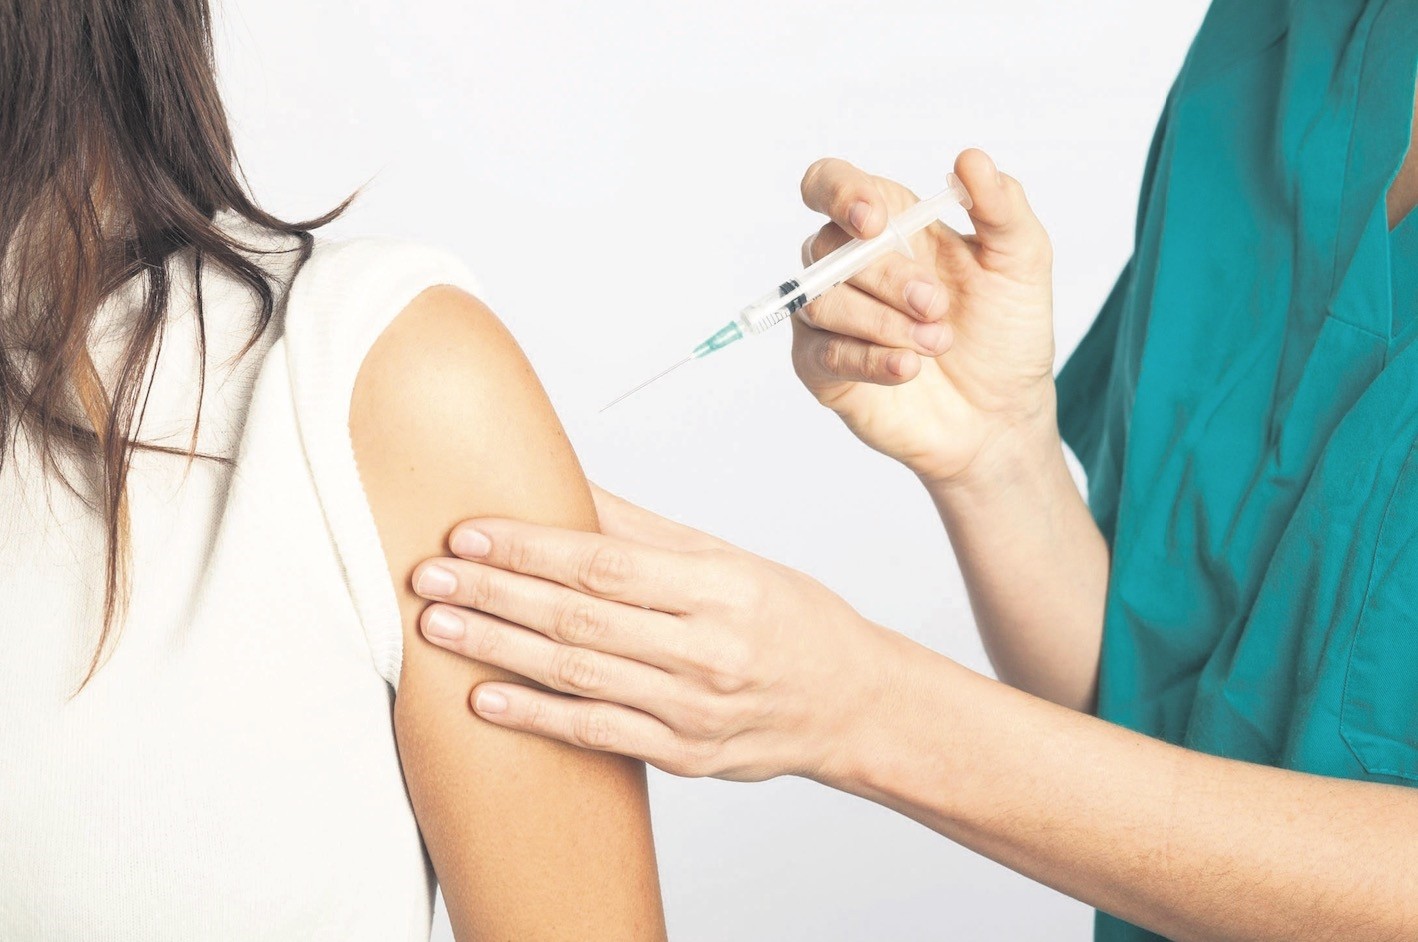 Although vaccines do not provide full protection against the flu, they are effective in most cases.